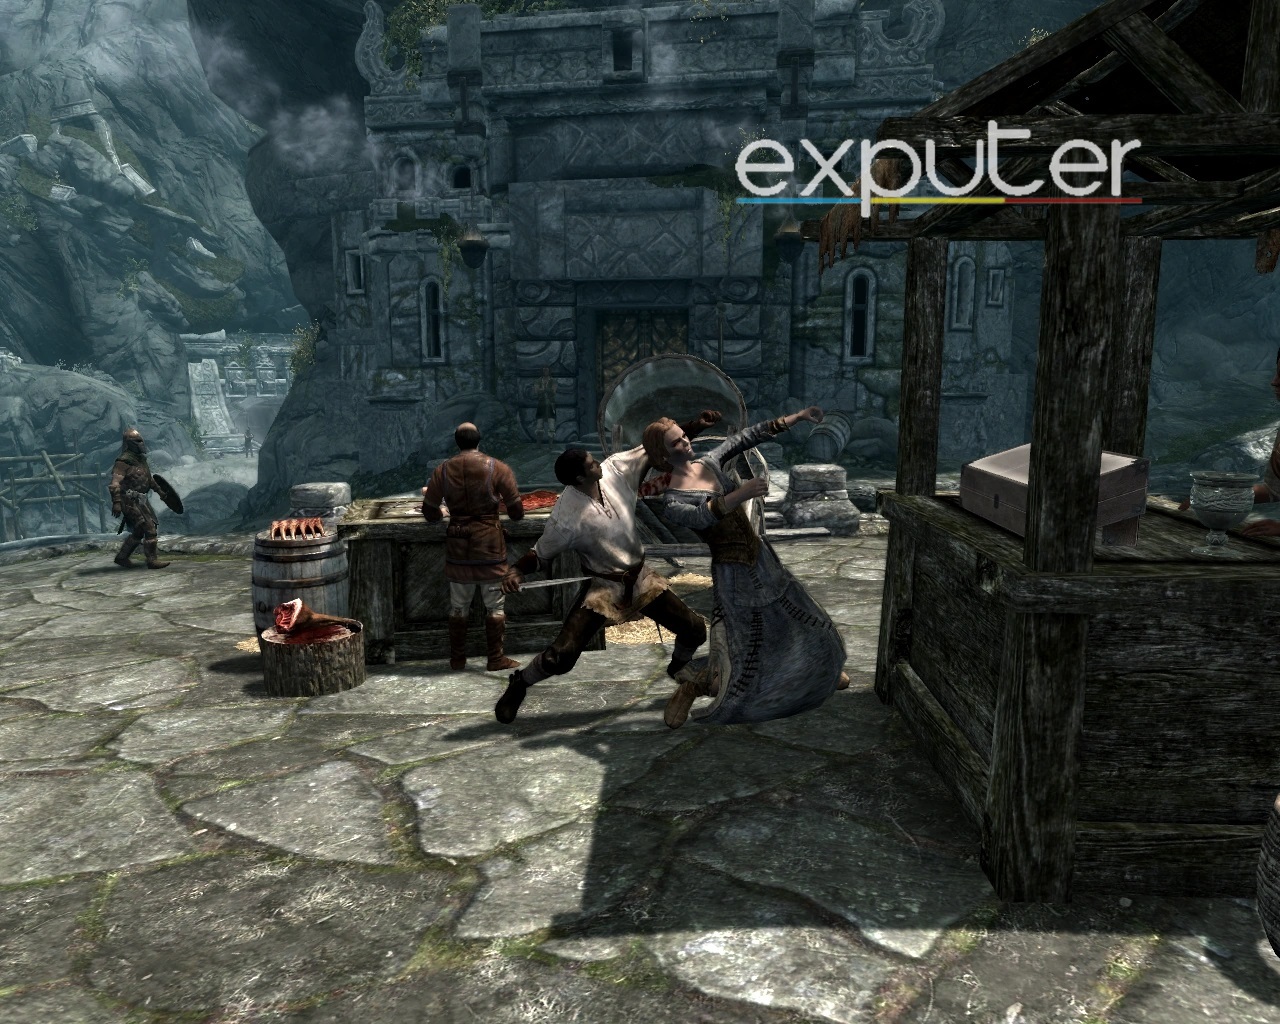 Skyrim: The Forsworn Conspiracy Quest 